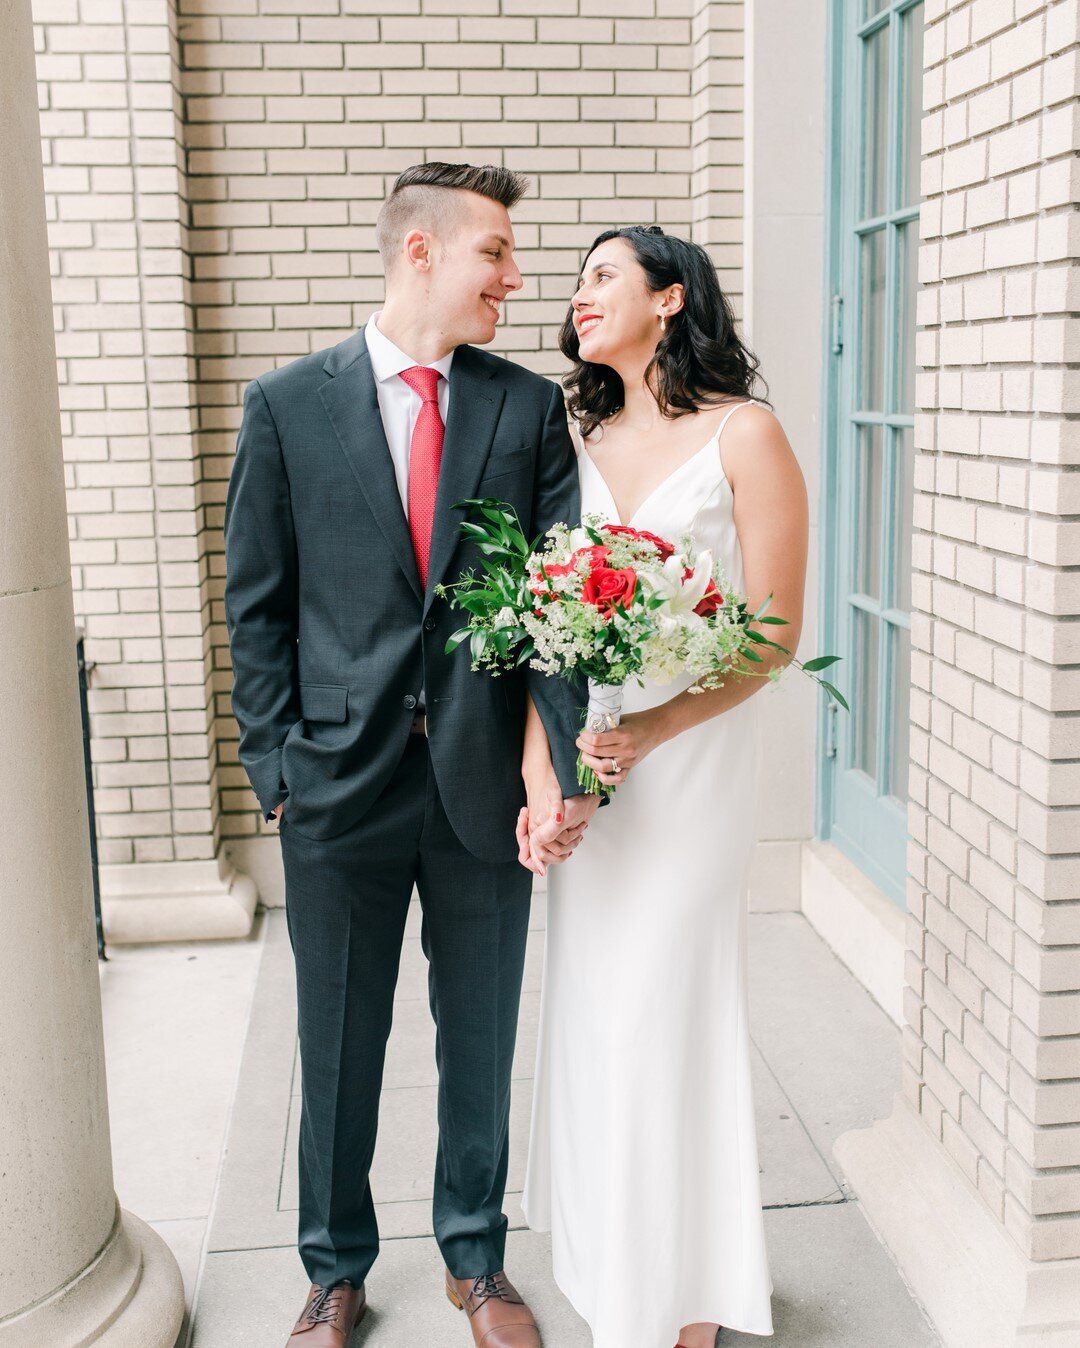 How lovely are Candice &amp; Kyle?! They had a sweet intimate ceremony at the HPO over Memorial Day weekend and we're so happy we could host them! 📸 @virginiaweddingcompany⠀⠀⠀⠀⠀⠀⠀⠀⠀
.⠀⠀⠀⠀⠀⠀⠀⠀⠀
.⠀⠀⠀⠀⠀⠀⠀⠀⠀
.⠀⠀⠀⠀⠀⠀⠀⠀⠀
#thehistoricpostoffice #hrvaweddin